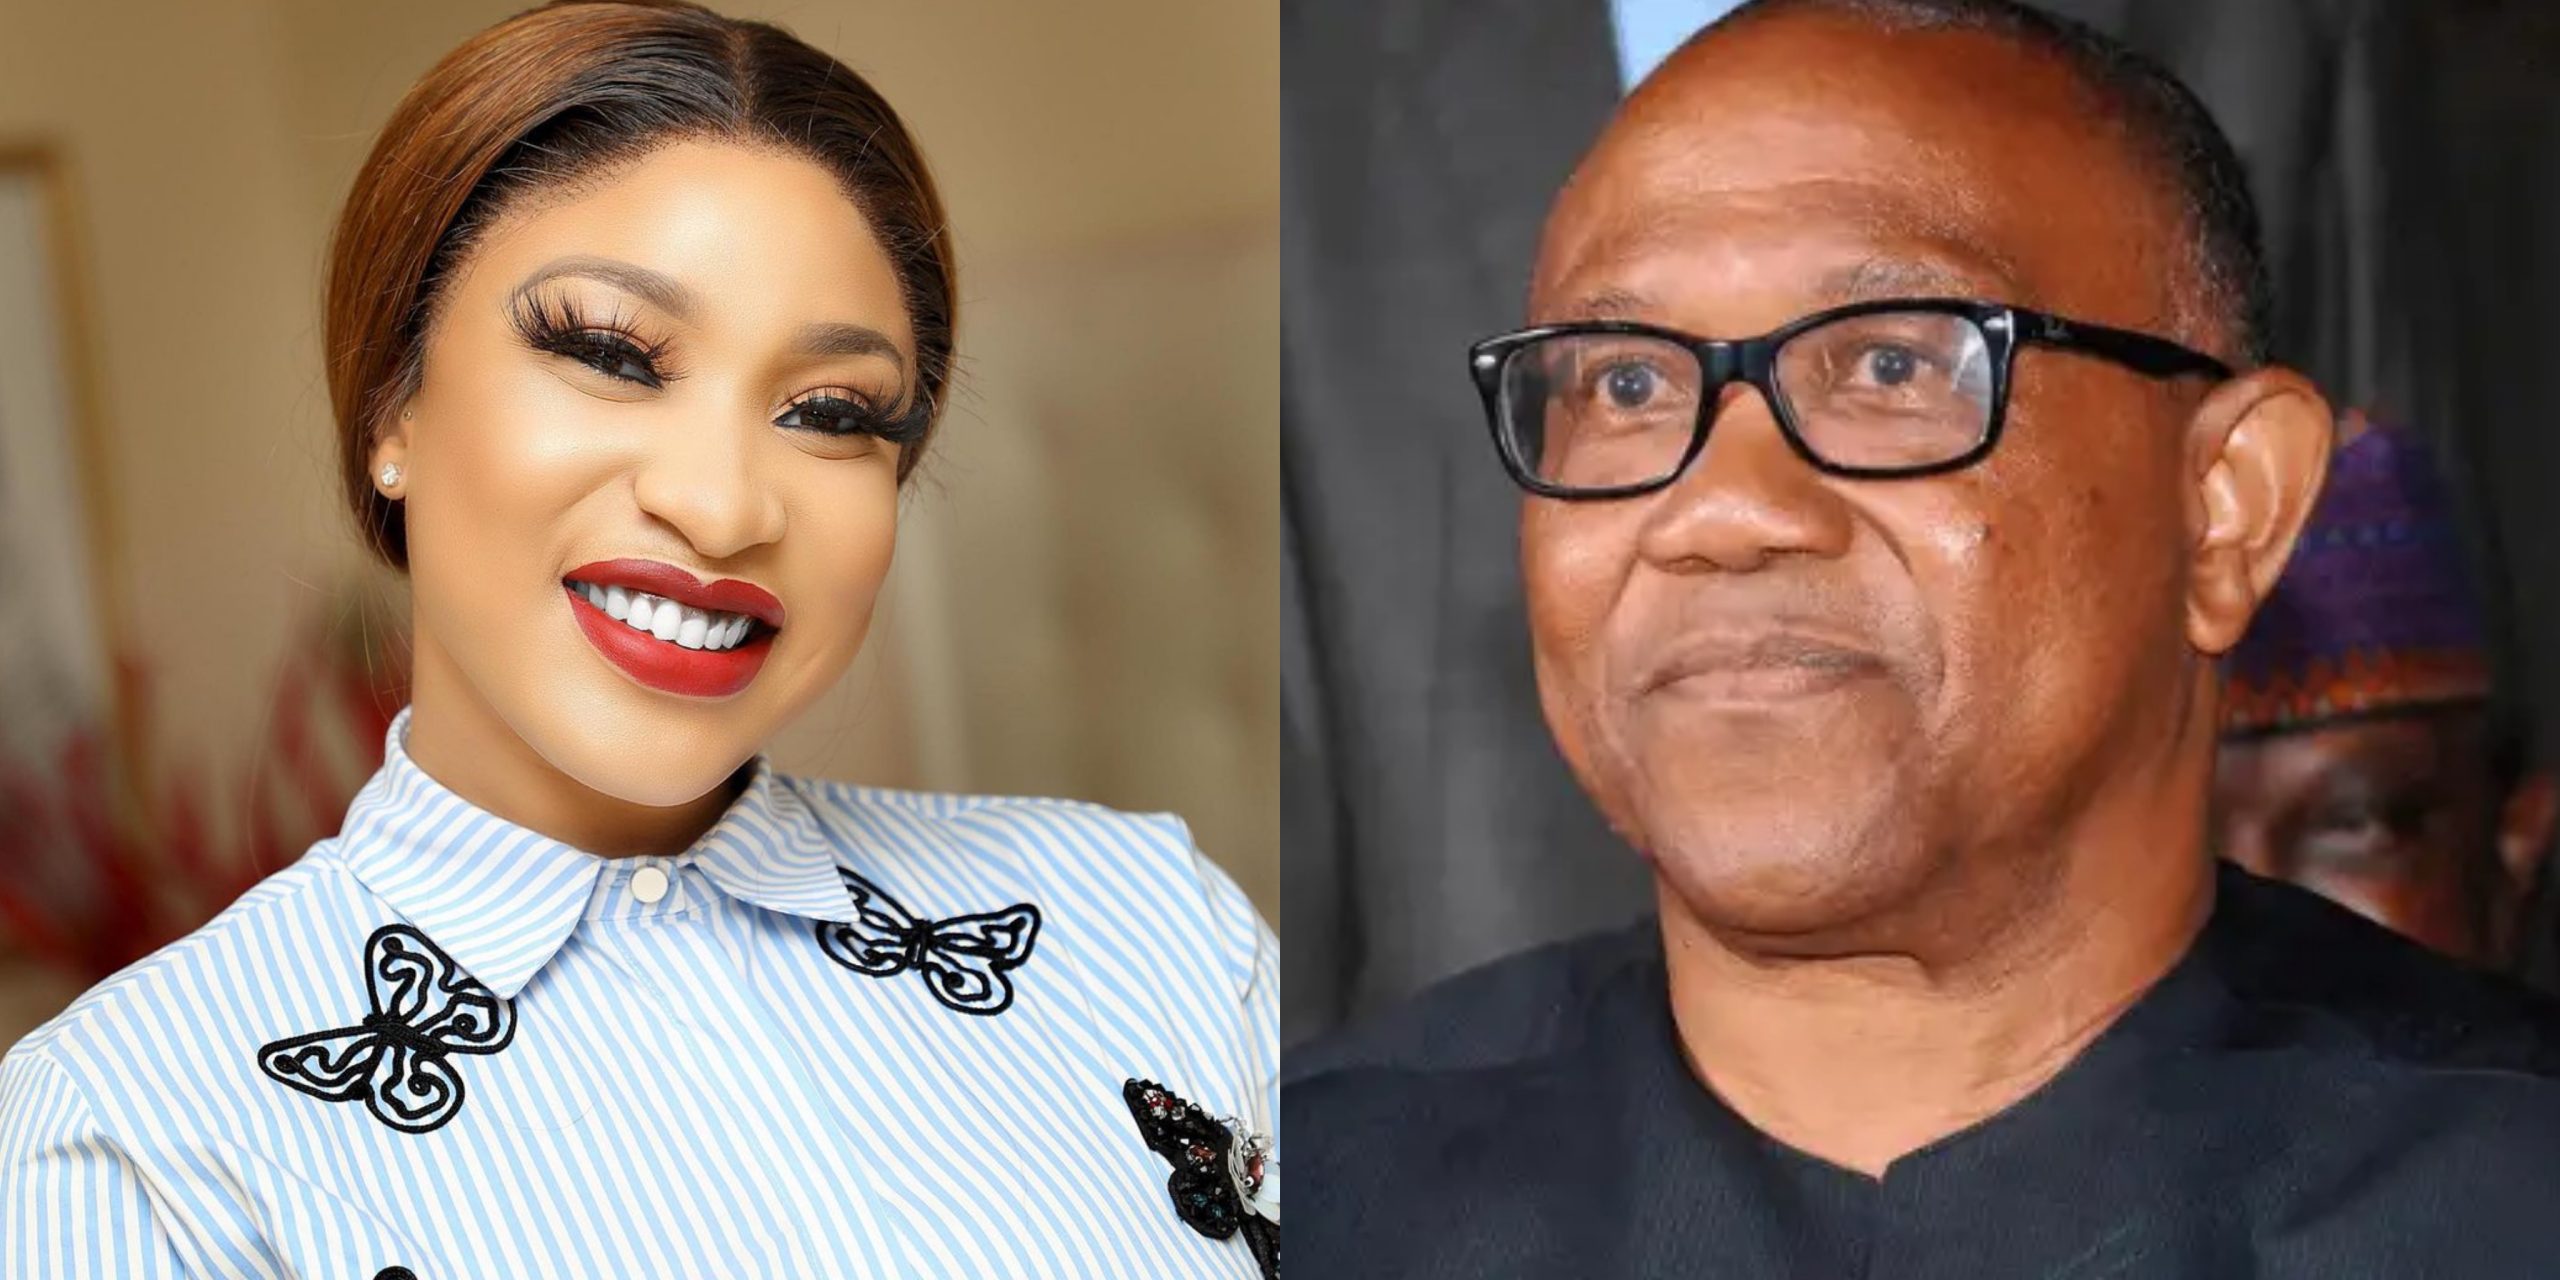 I am highly disappointed in you – Tonto Dikeh blasts Peter Obi over ‘shabby’ borehole project